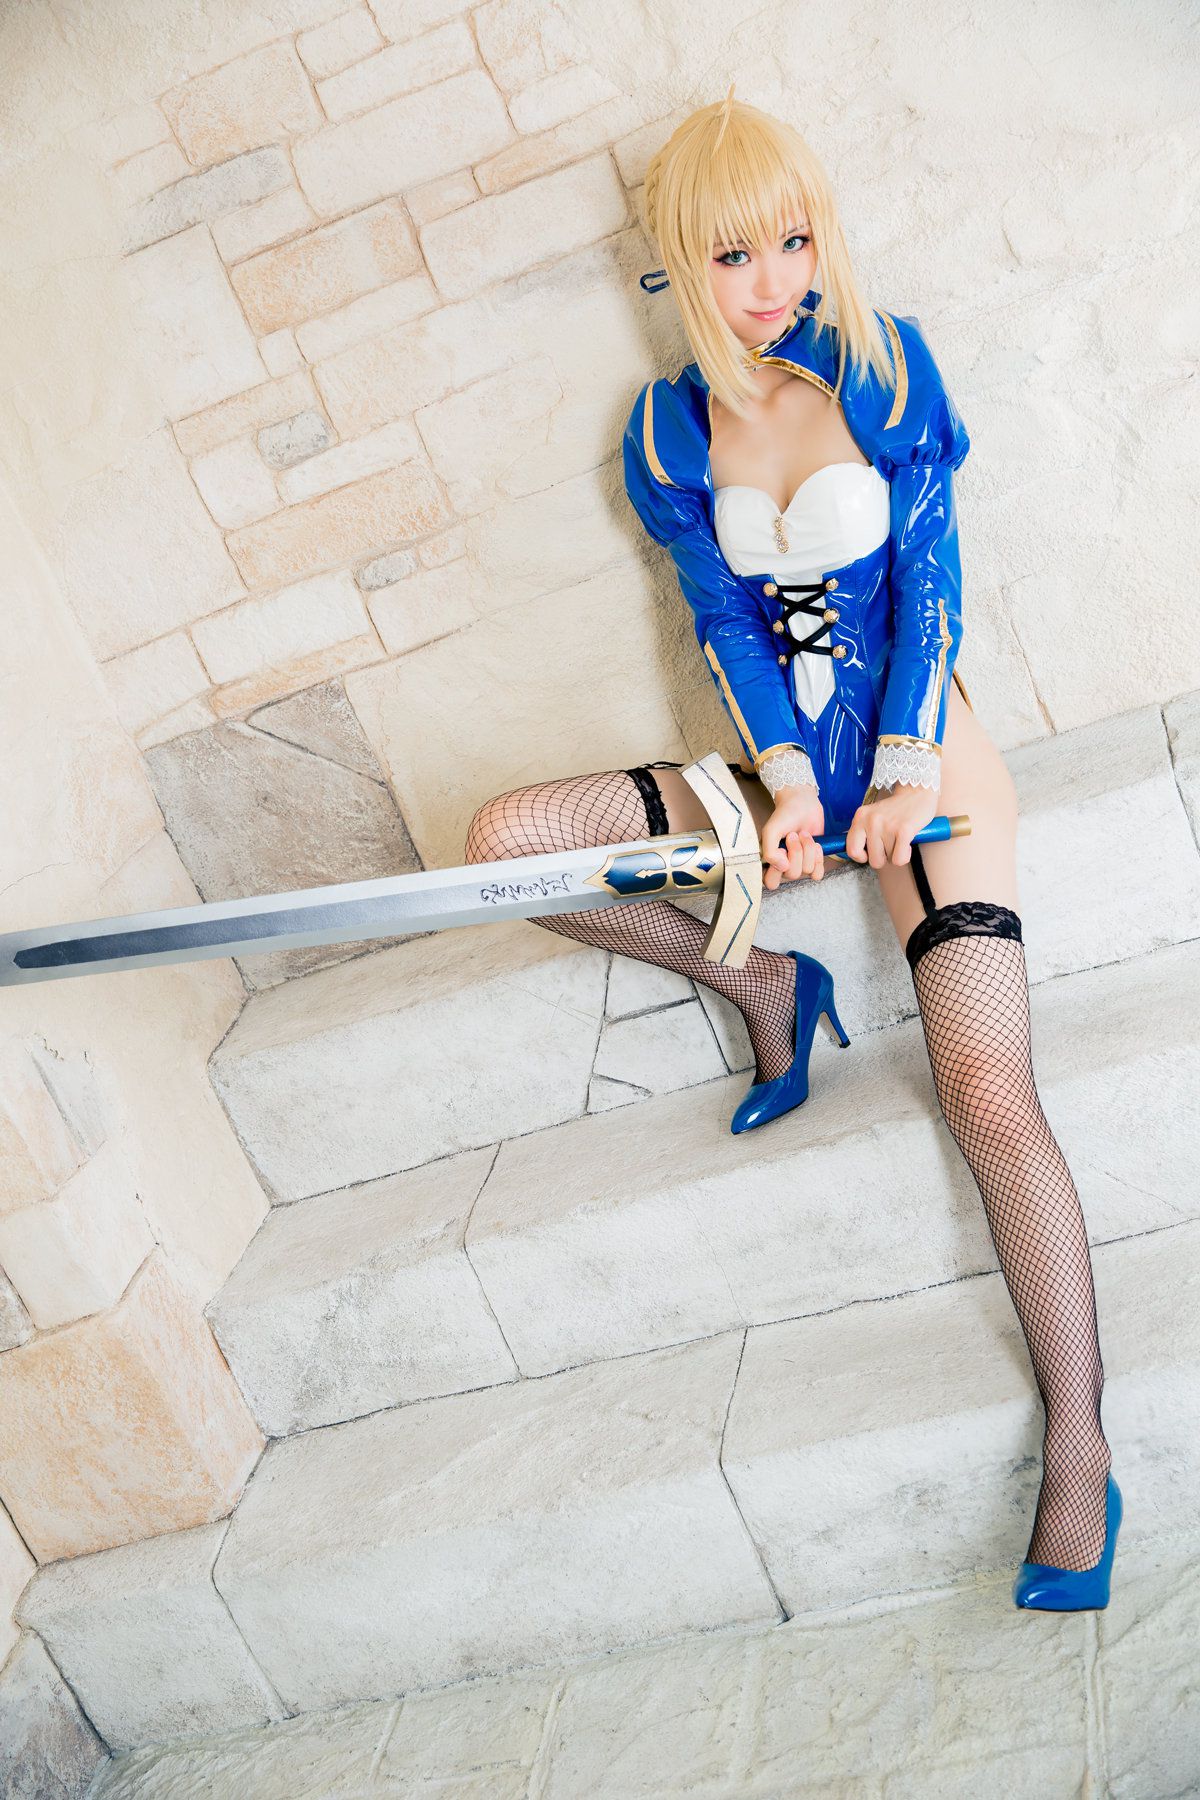 Mike 《Fate stay night》 Saber [Mikehouse]